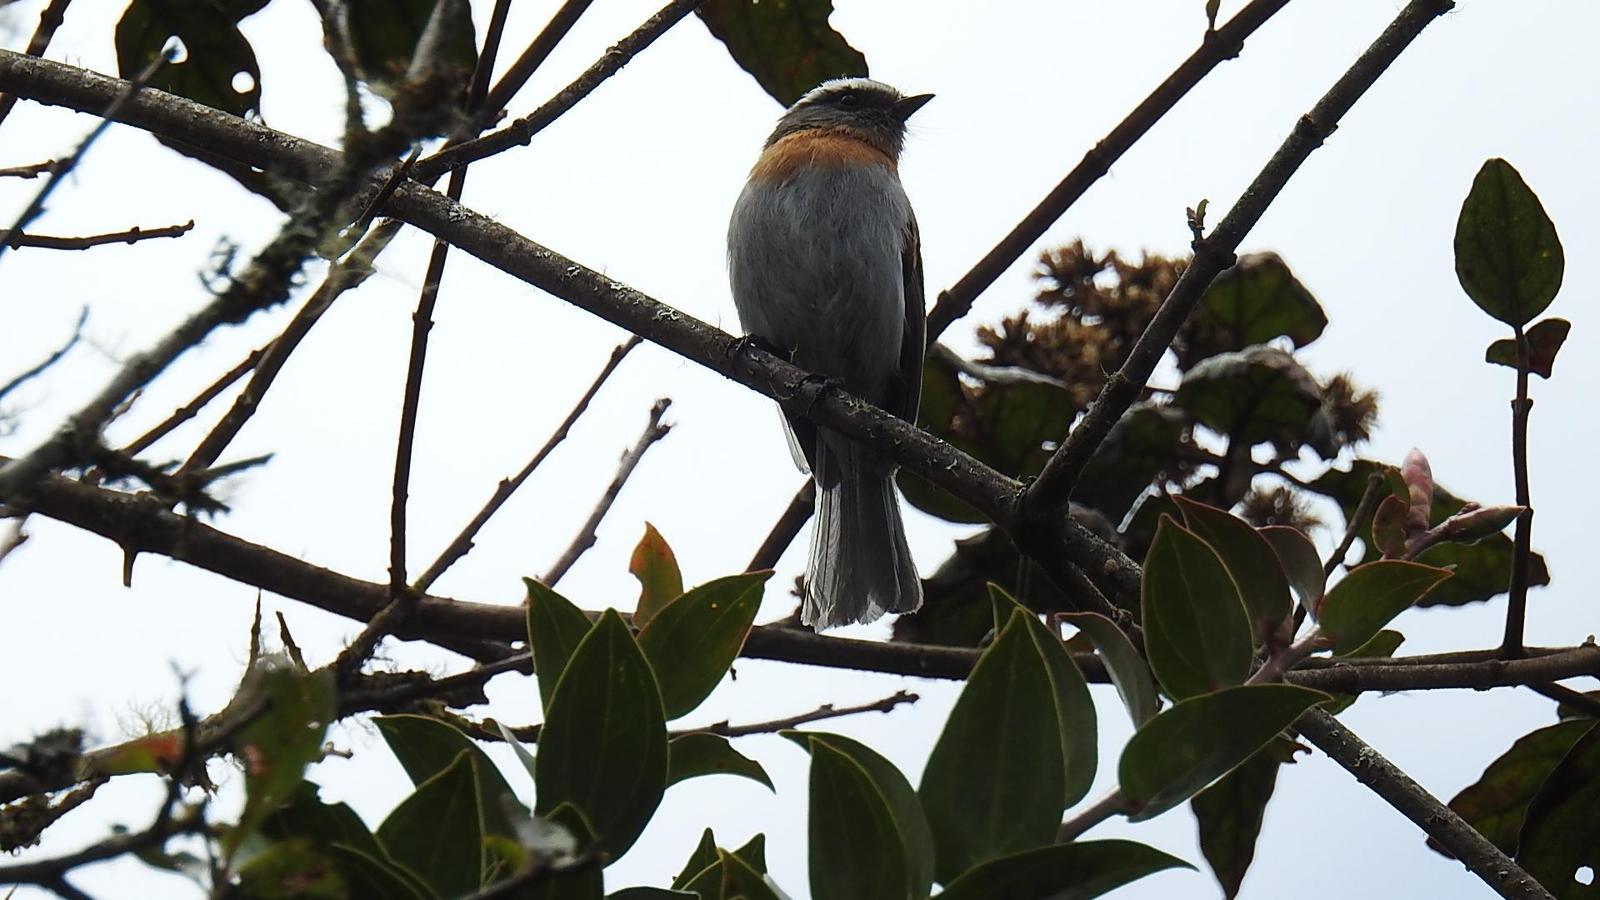 Rufous-breasted Chat-Tyrant Photo by Julio Delgado